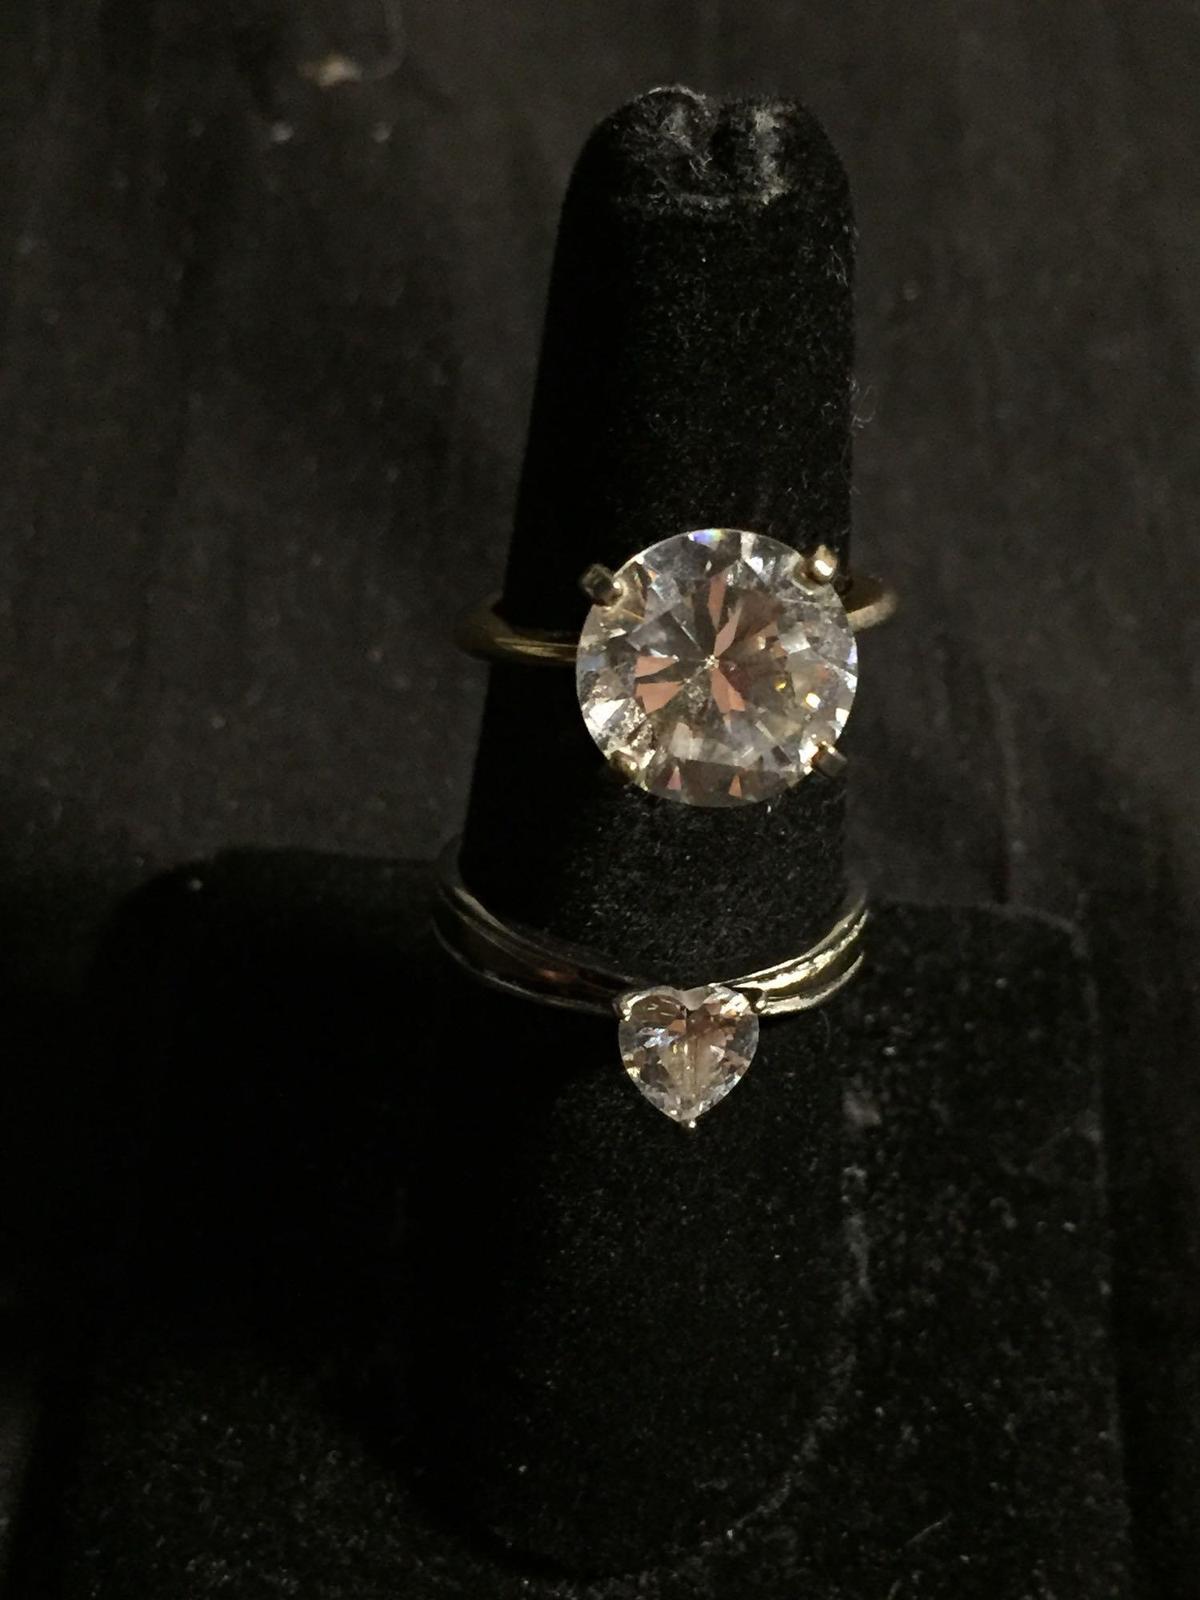 Lot of Two Alloy Engagement Ring Bands, One Gold-Tone w/ Round 11mm CZ & Silver-Tone w/ 5.5mm Heart